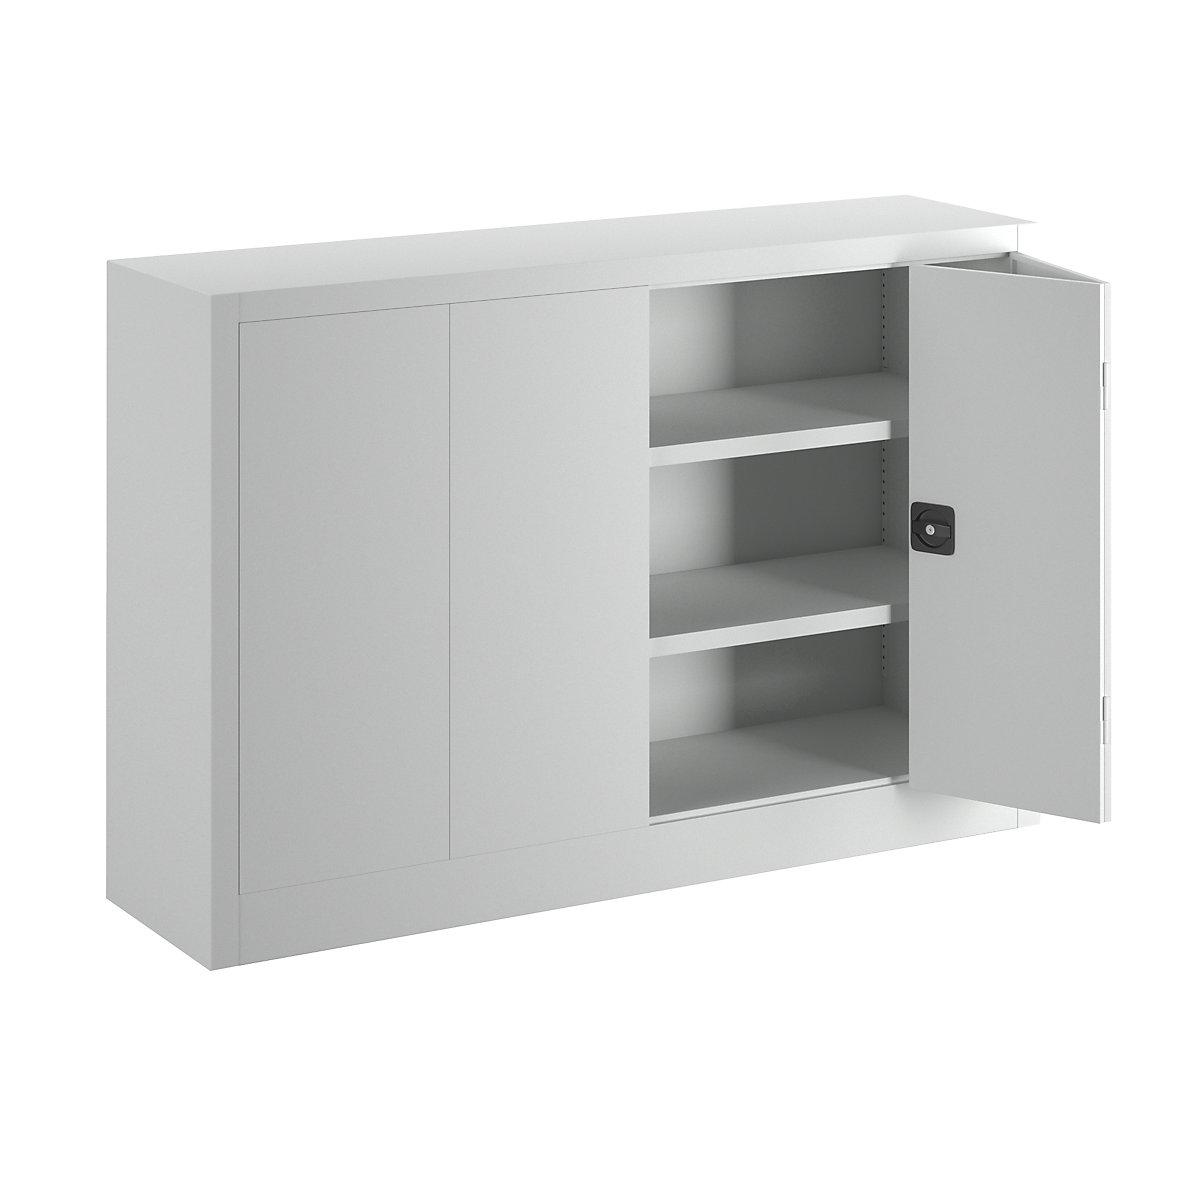 Cupboard with folding doors, height 1000 mm - Pavoy